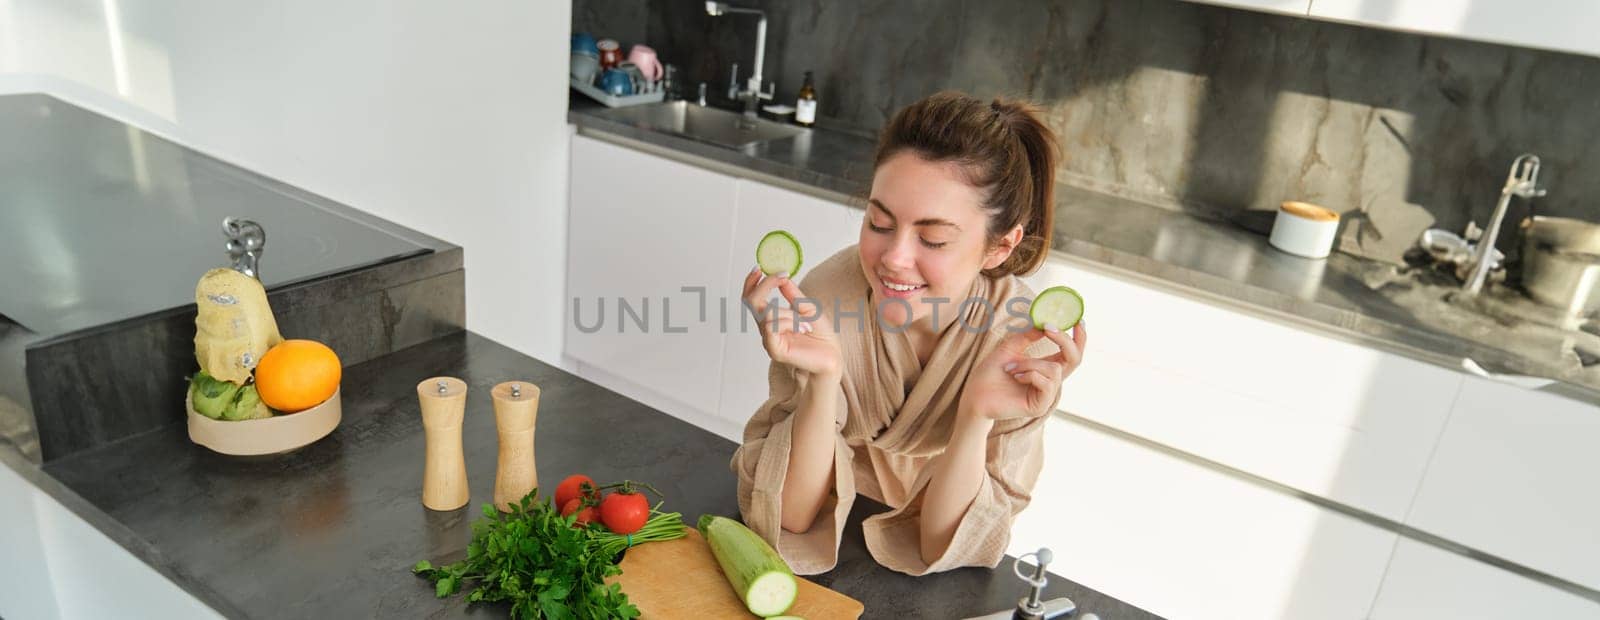 Portrait of beautiful brunette woman in the kitchen, wearing bathrobe, chopping vegetables on board, cooking healthy vegetarian food, preparing salad, making a meal.